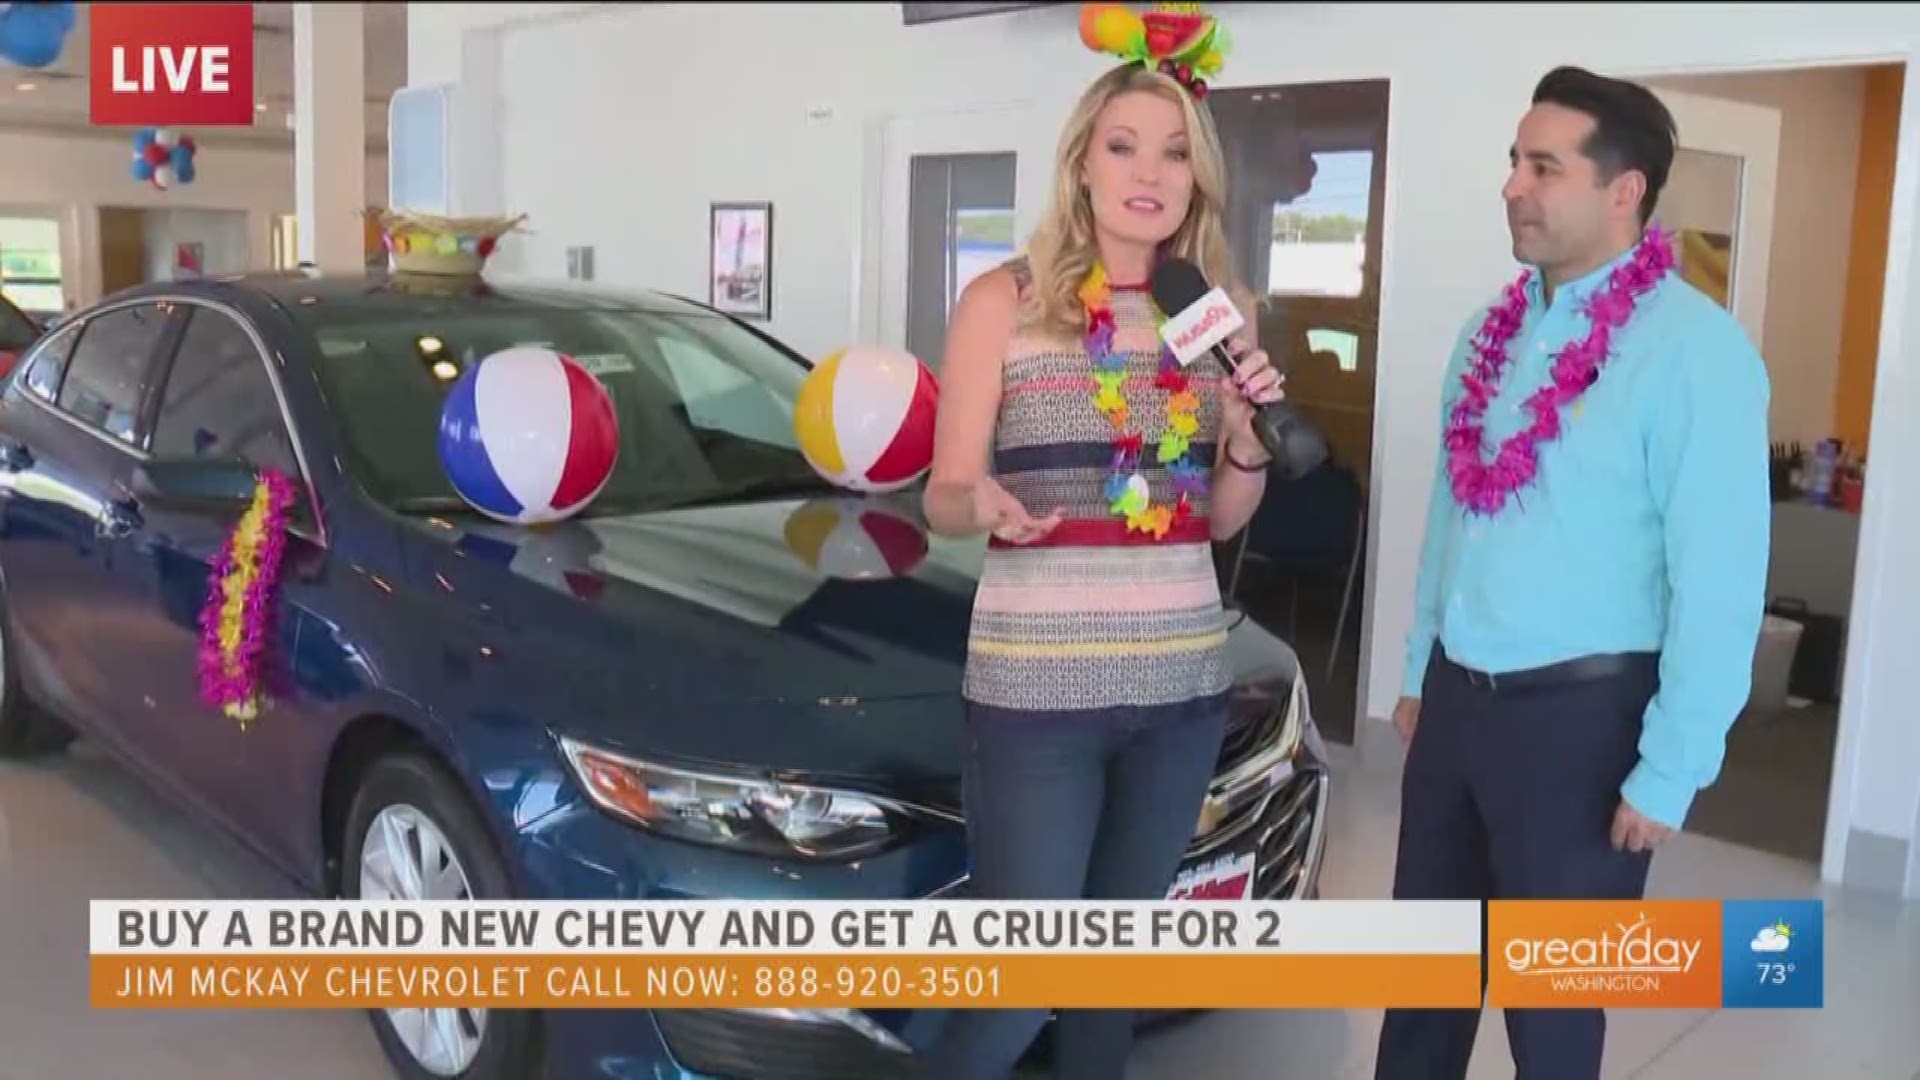 Buy a brand new Chevy at Jim McKay Chevrolet between Friday, May 24 - Monday, May 27, 2019, and you'll get a FREE cruise for two to either the Caribbean, Bahamas or Singapore. Call 888-920-3501 to make an appointment.